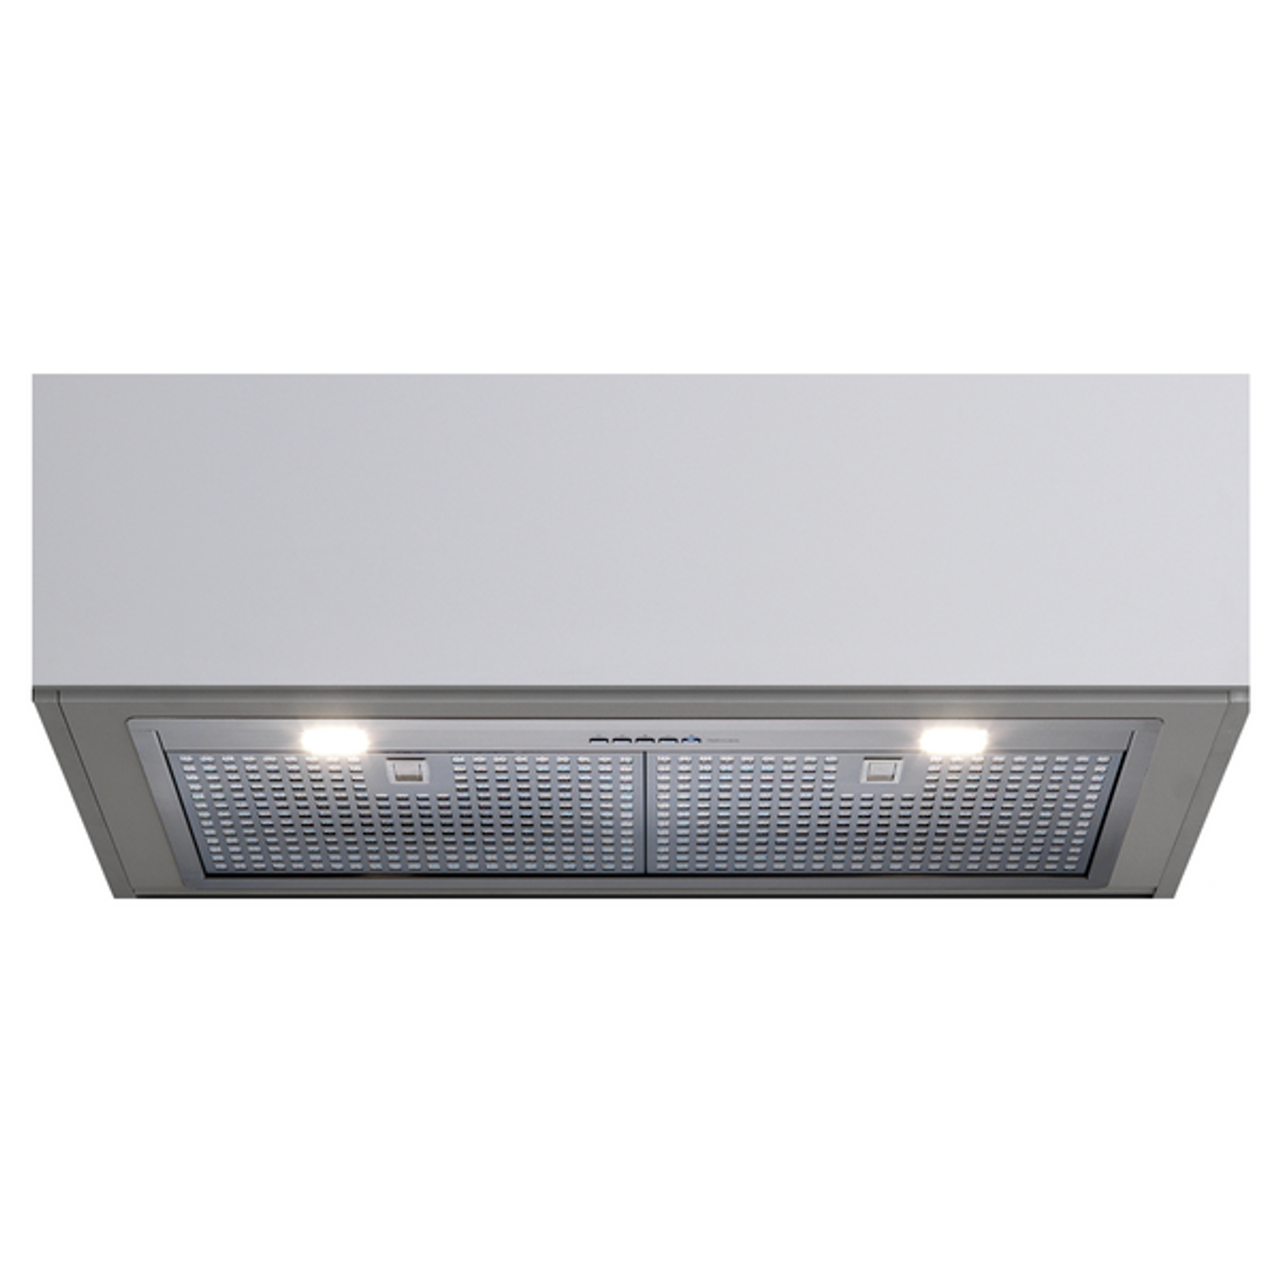 F3GN80S1 - 80cm Gruppo Incasso NRS Undermount Rangehood with Remote Control - Stainless Steel